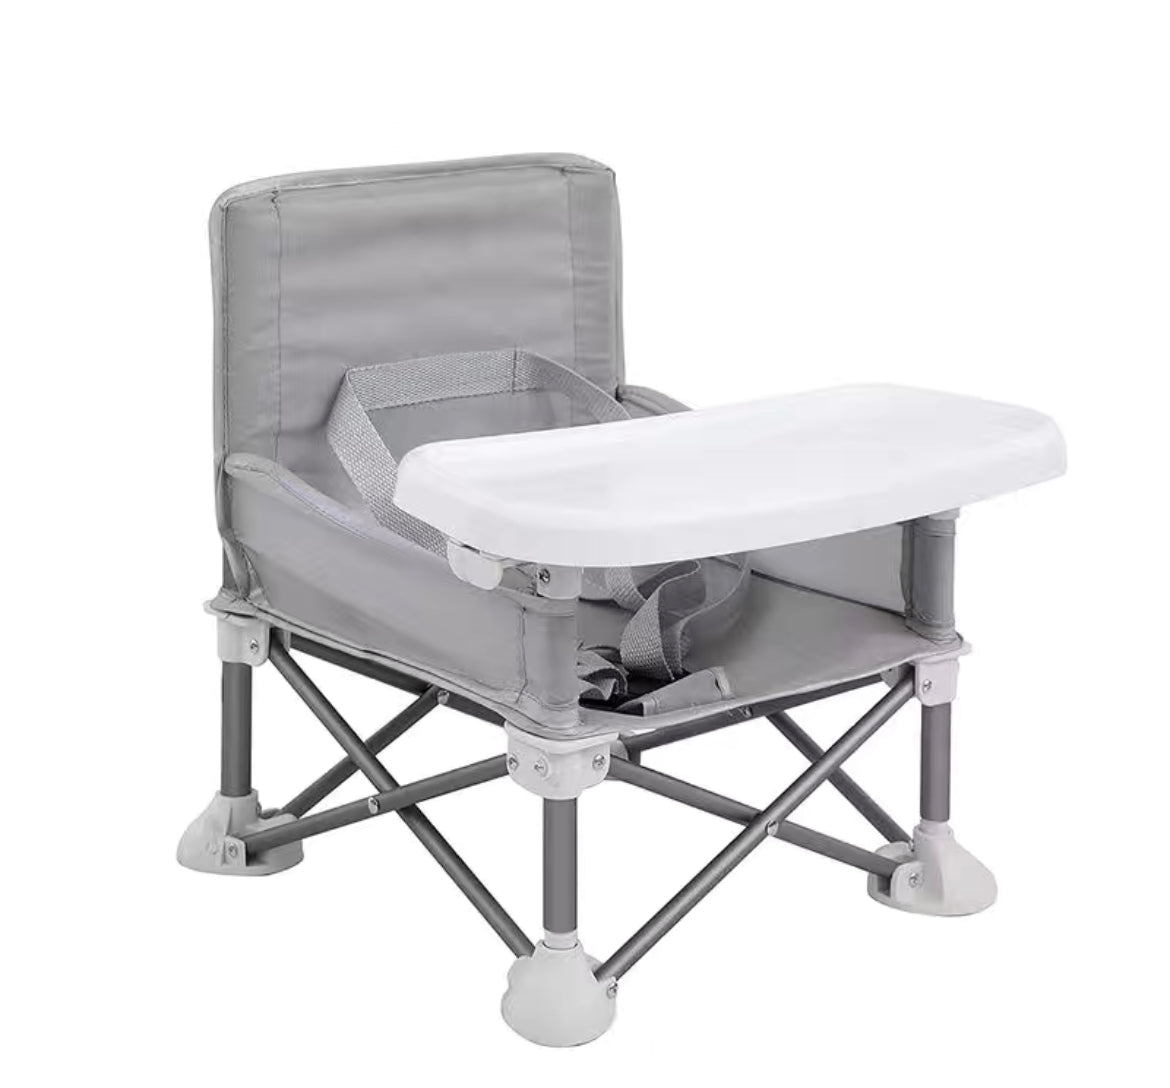 NEW! PORTABLE LIGHTWEIGHT HIGHCHAIR - 2 COLOURS AVAILABLE